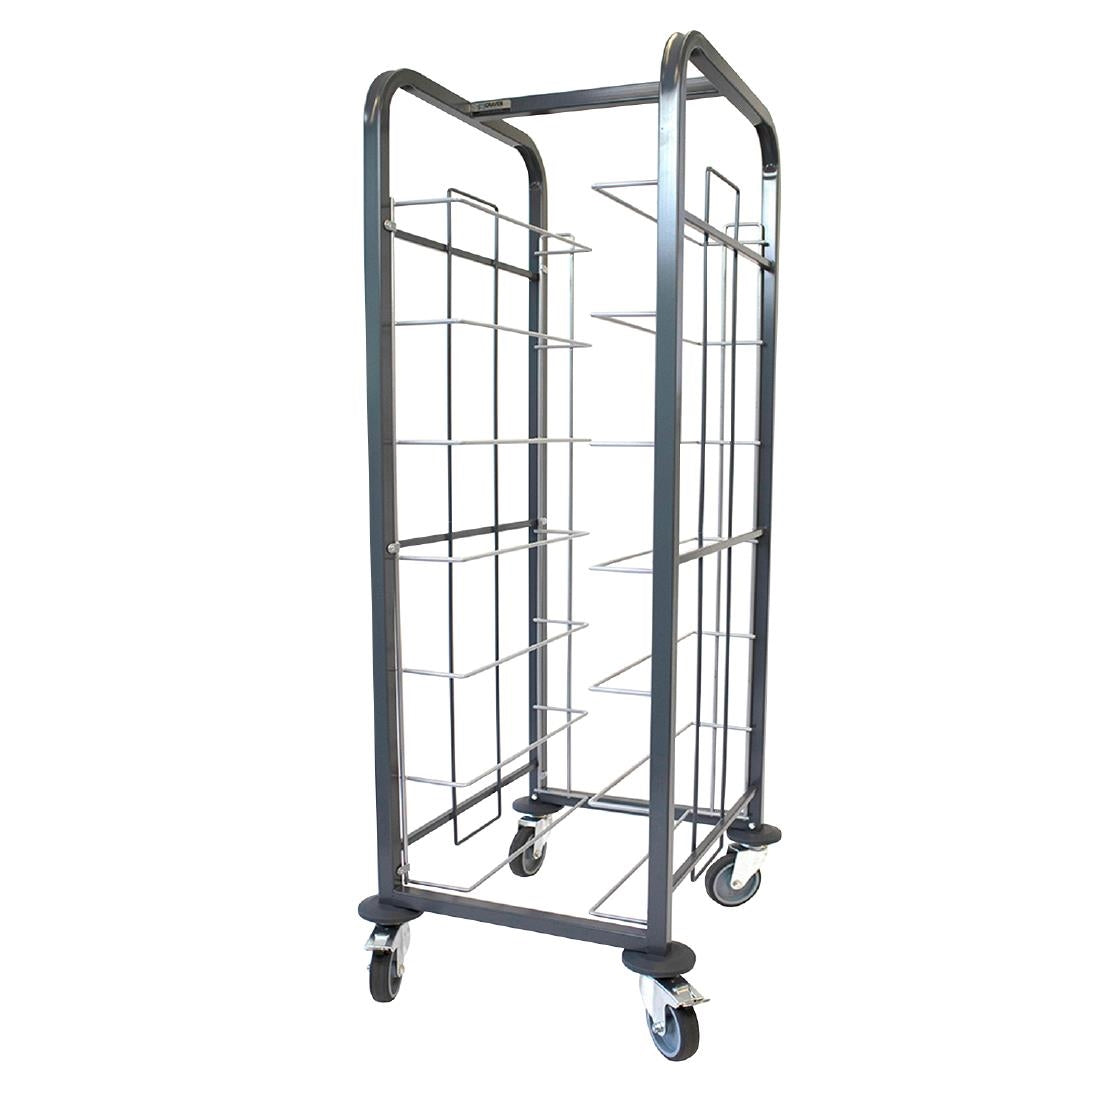 GG137 Craven Steel Tray Clearing Trolley 7 Shelves JD Catering Equipment Solutions Ltd